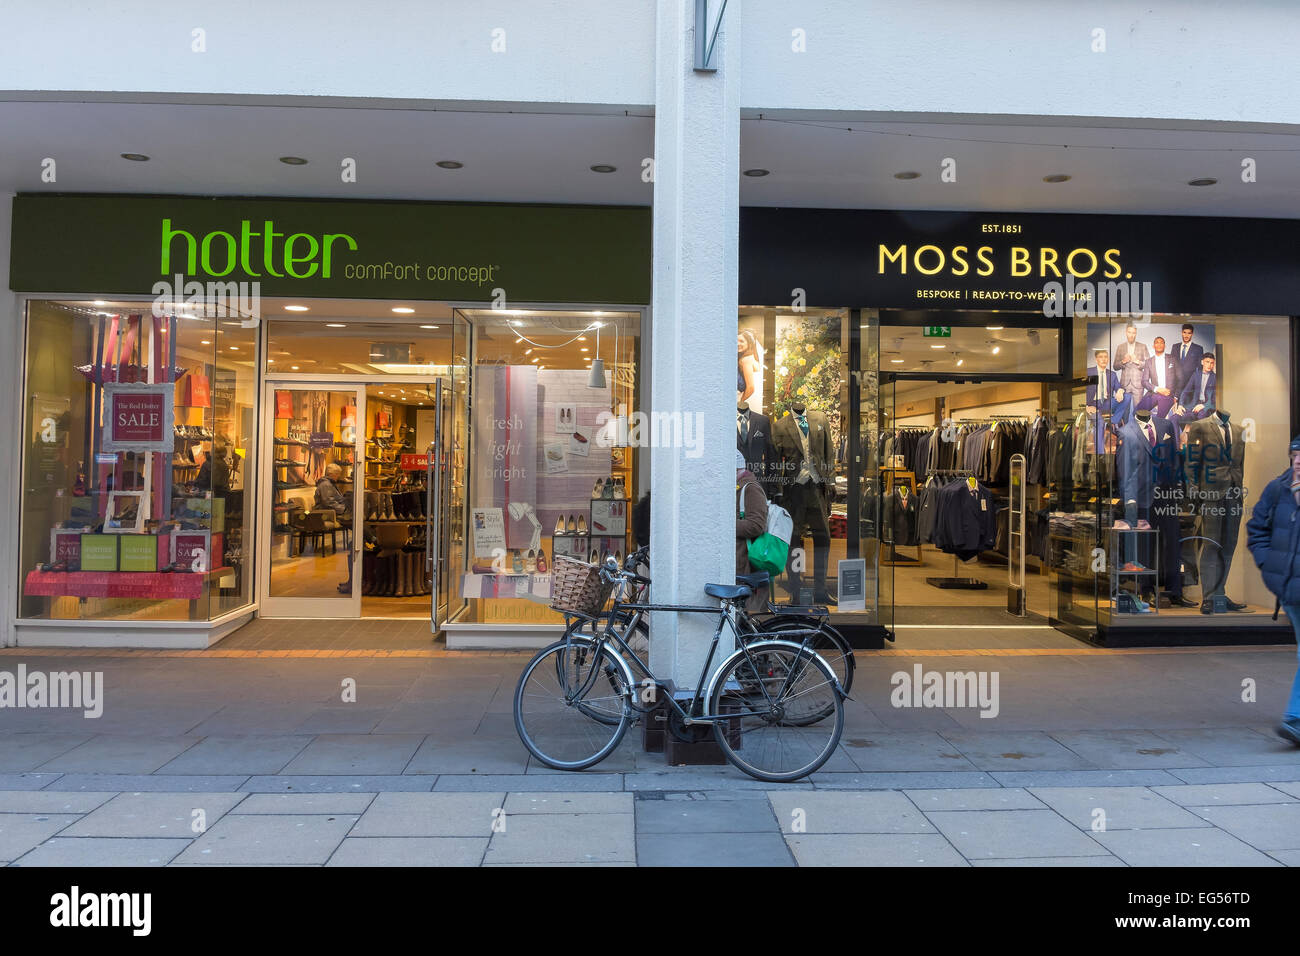 Hotter and Moss Bros shop fronts in Petty Cury Cambridge City Cambridgeshire England Stock Photo